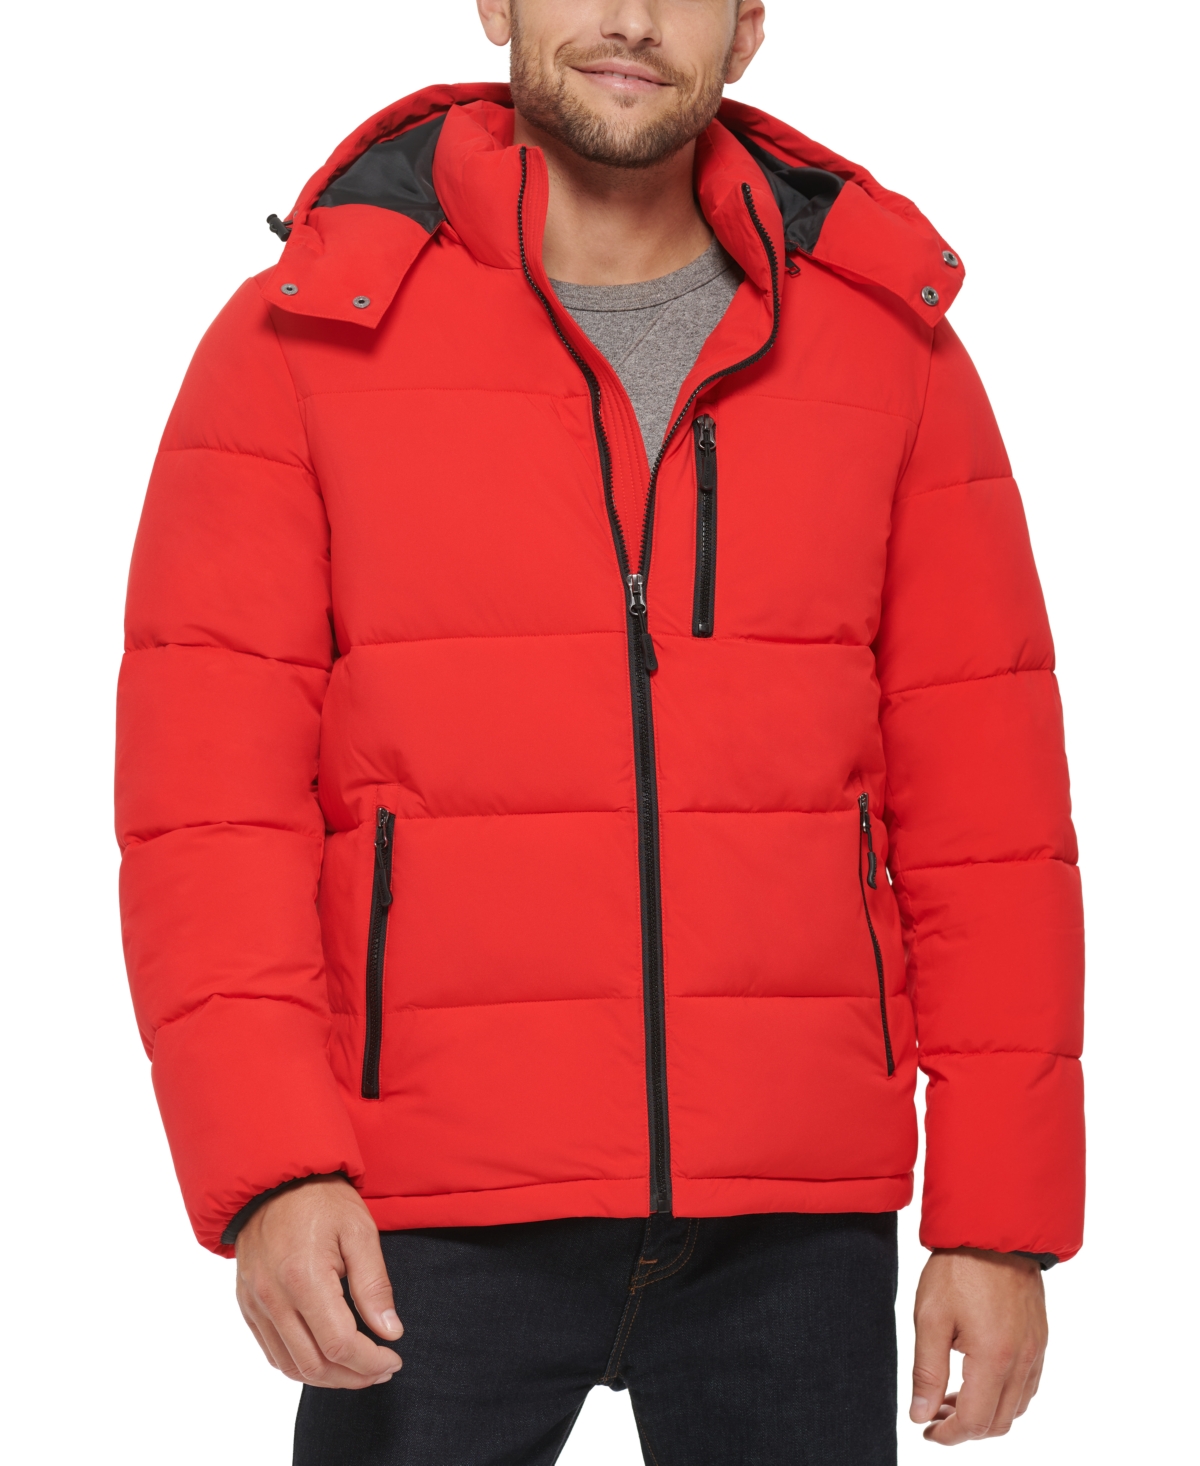 Men's Stretch Hooded Puffer Jacket, Created for Macy's - Black